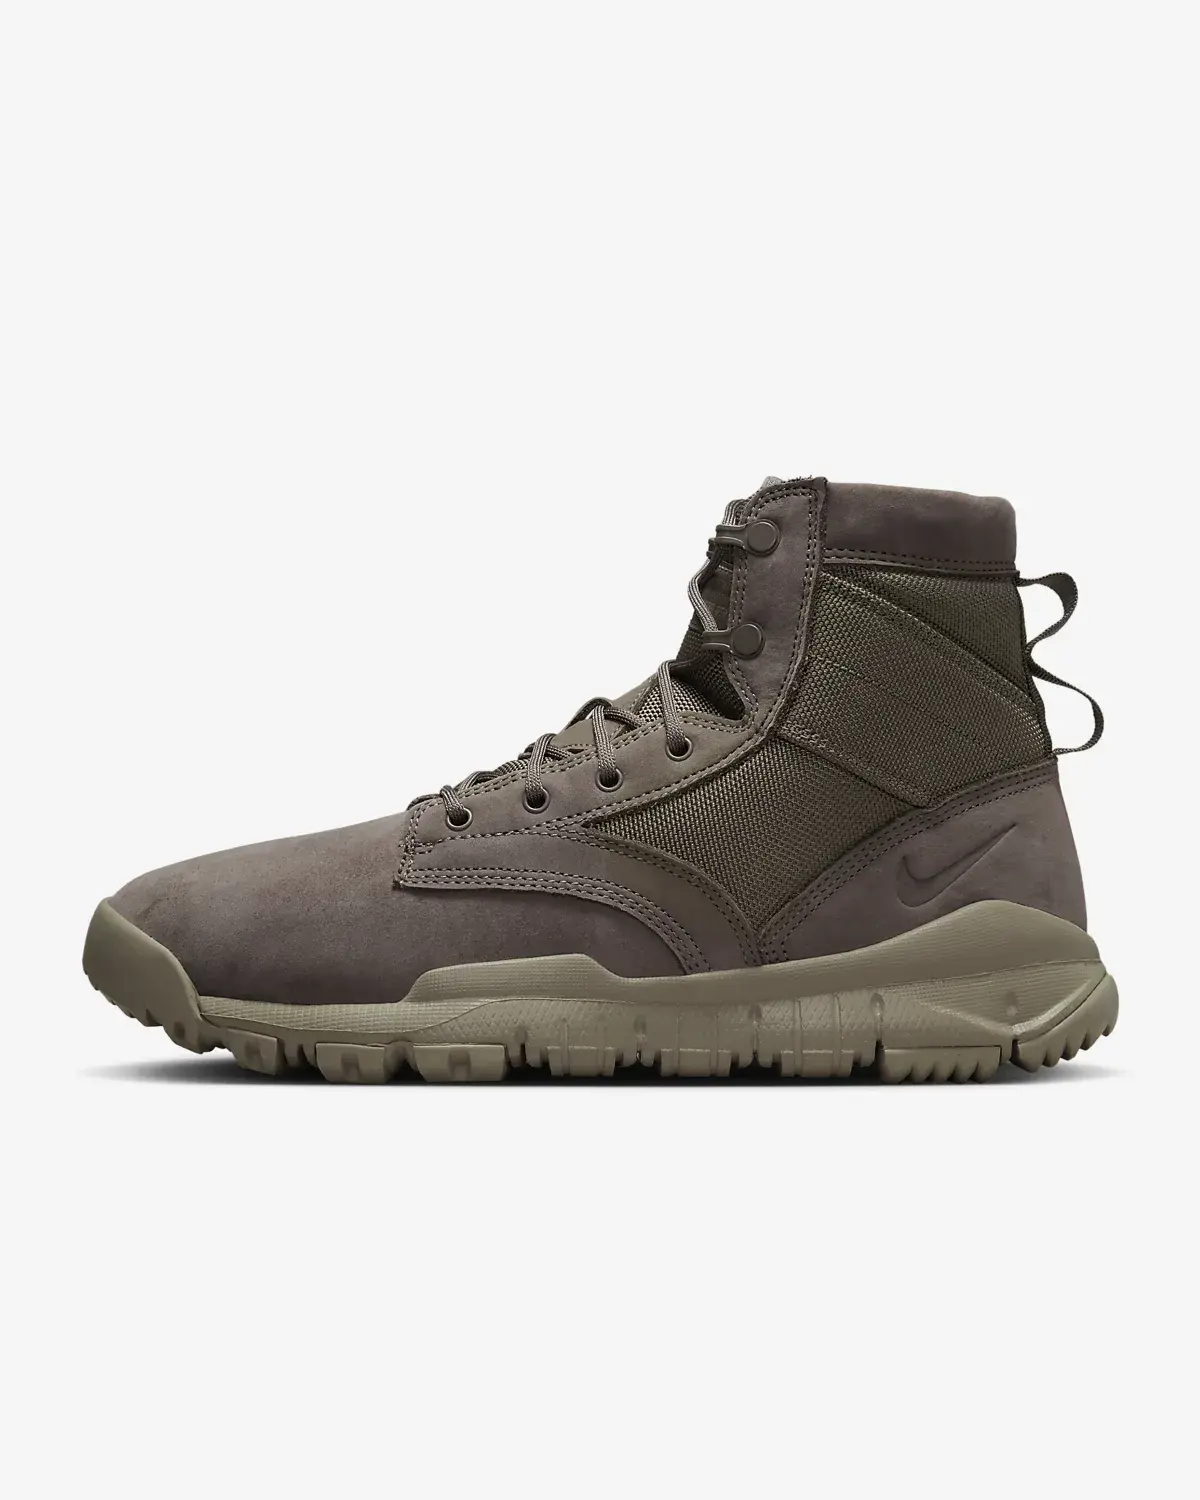 Nike SFB 6" (15cm approx.) Leather. 1